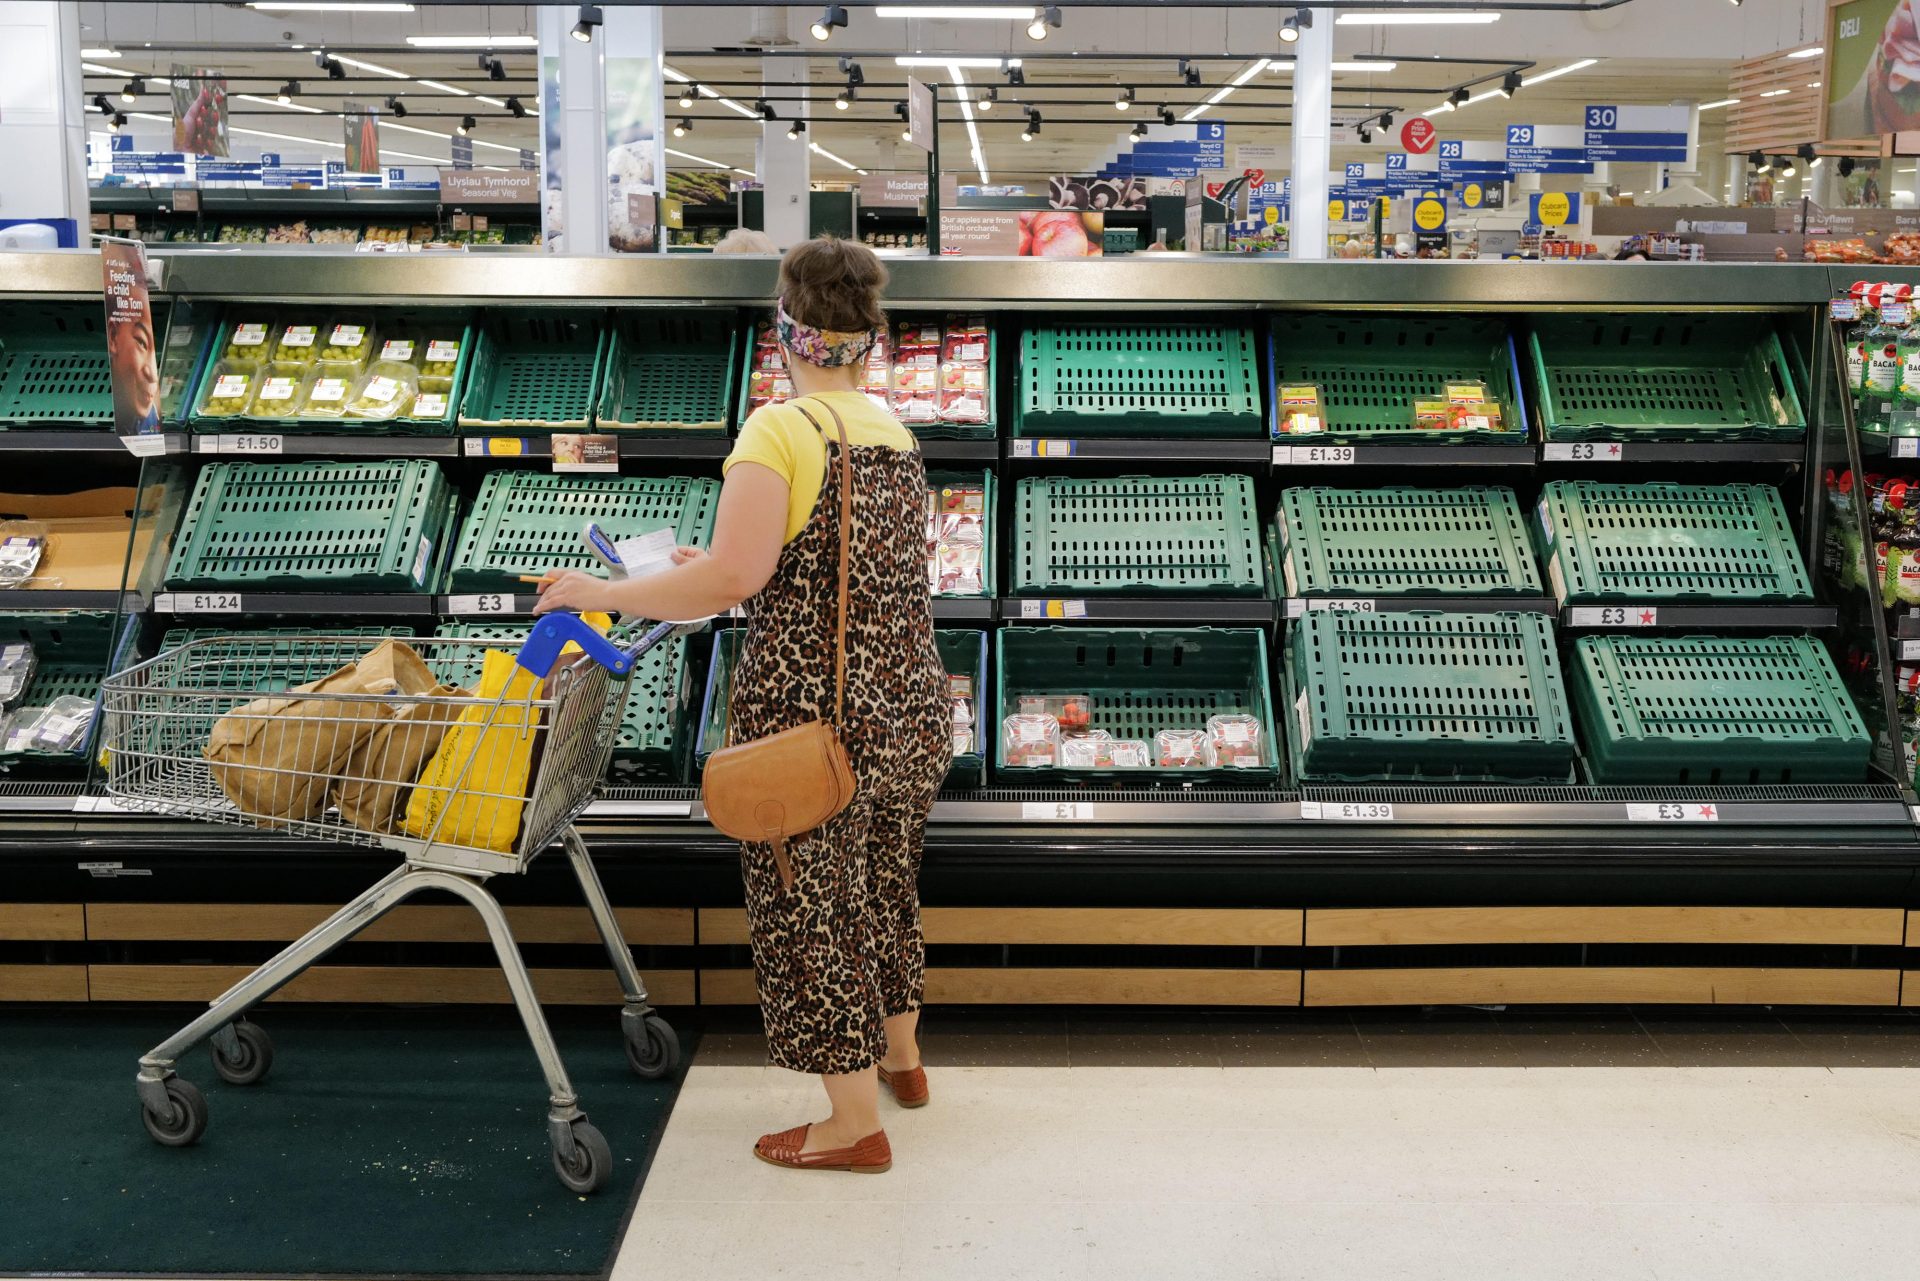 Brexit has made empty or depleted supermarket shelves a common sight. Here, a shopper in Cardiff weighs up the remaining choices. Photo: Charles McQuillan/Getty Images